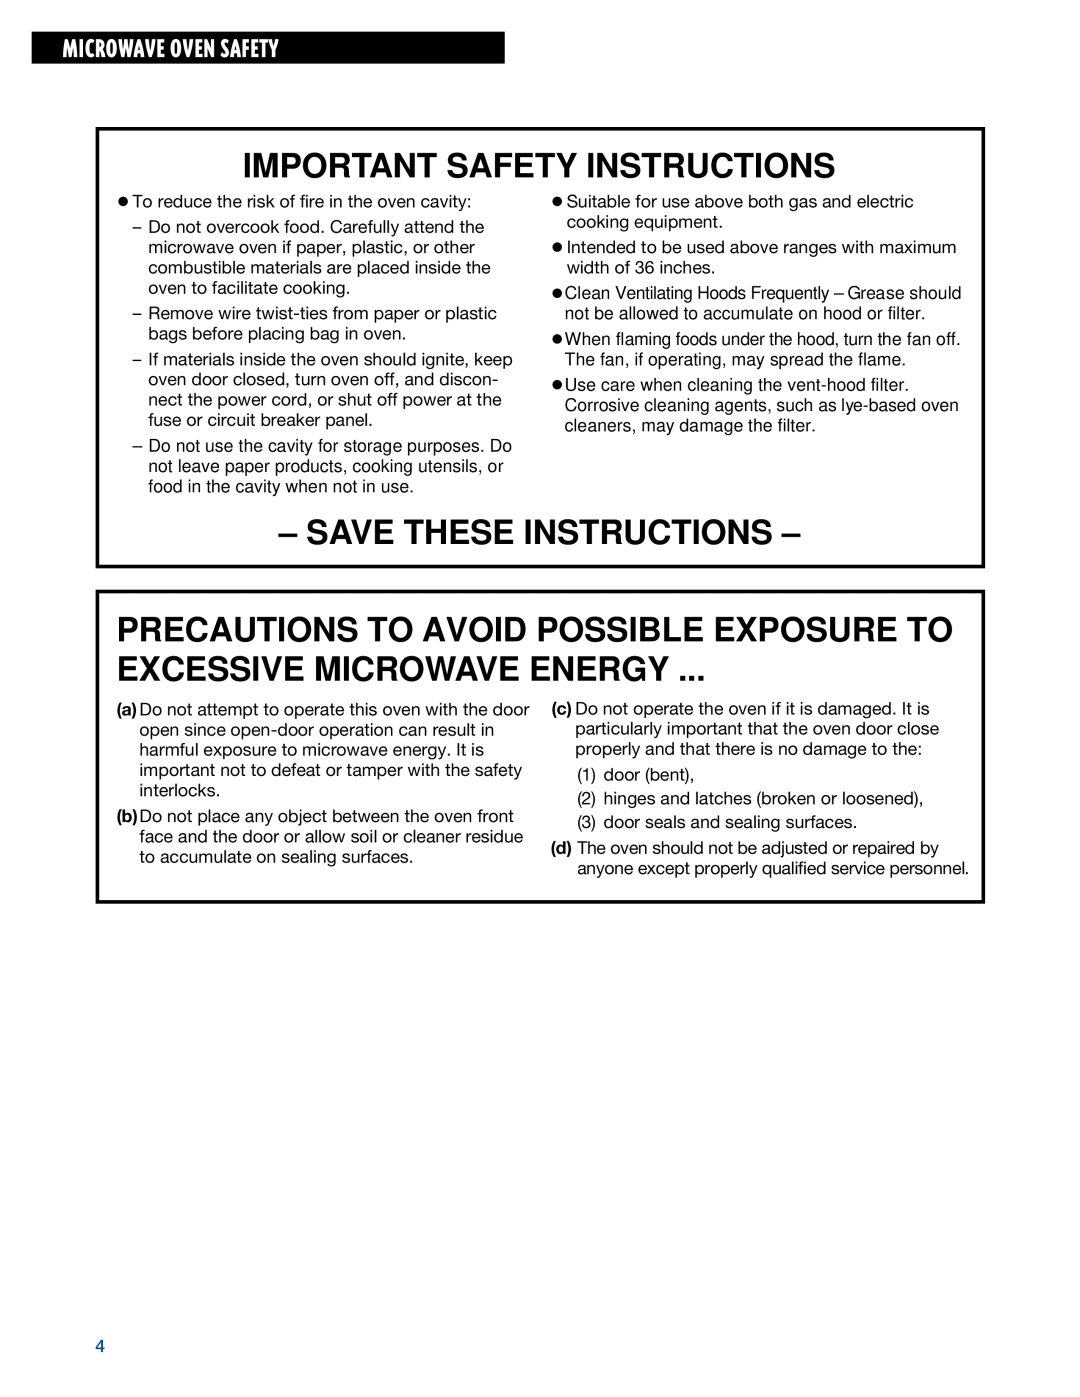 Whirlpool MHE14RF Important Safety Instructions, Precautions To Avoid Possible Exposure To, Excessive Microwave Energy 